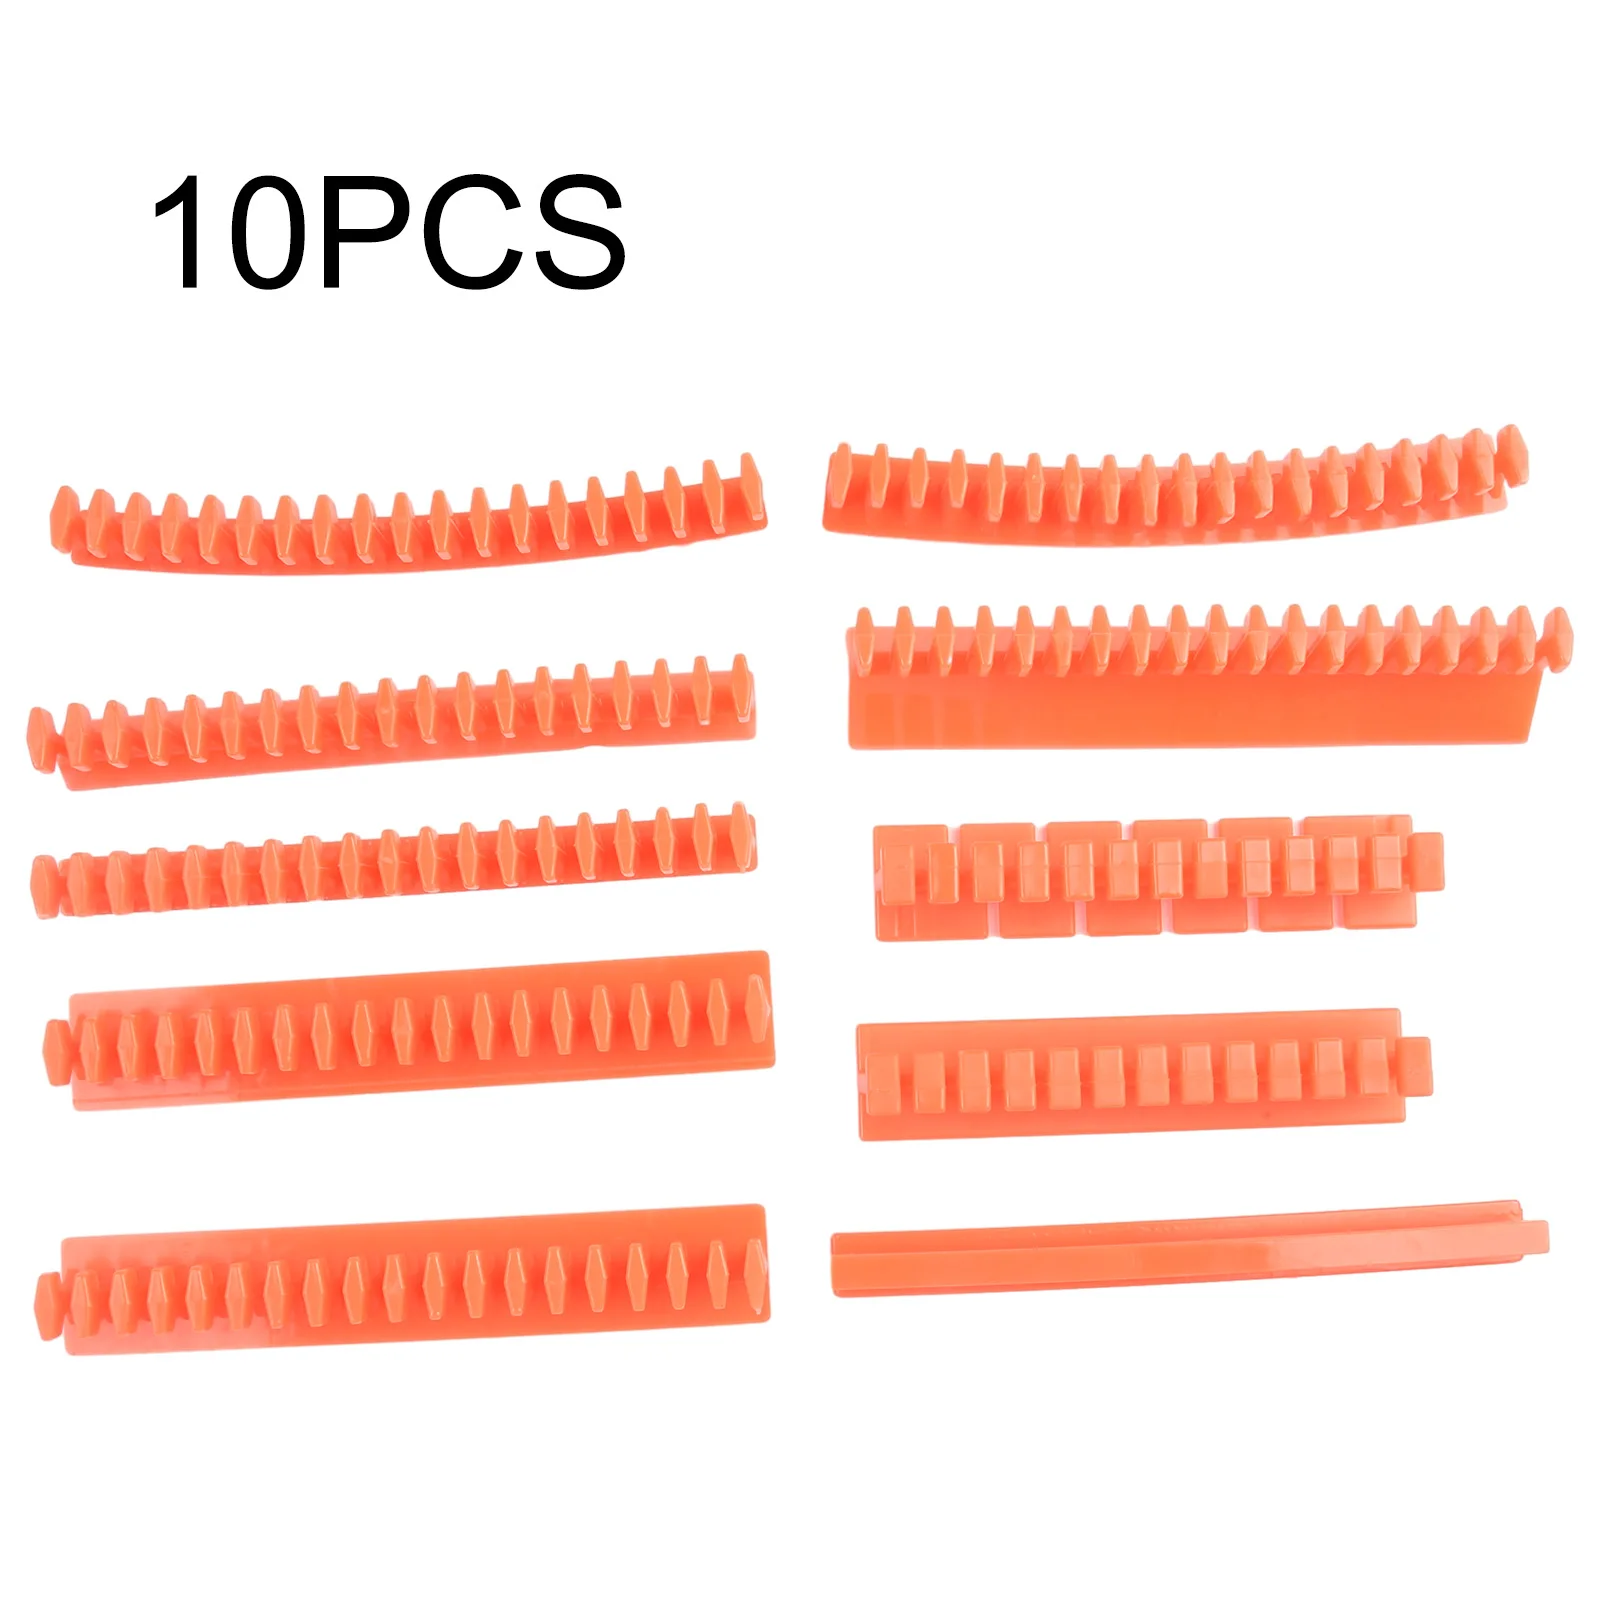 10pcs Car Dent Repair Tool Right Angle Pull Edge Pull Out Shim Dent Dent Repair For Sheet Metal Processing Pulling Tabs